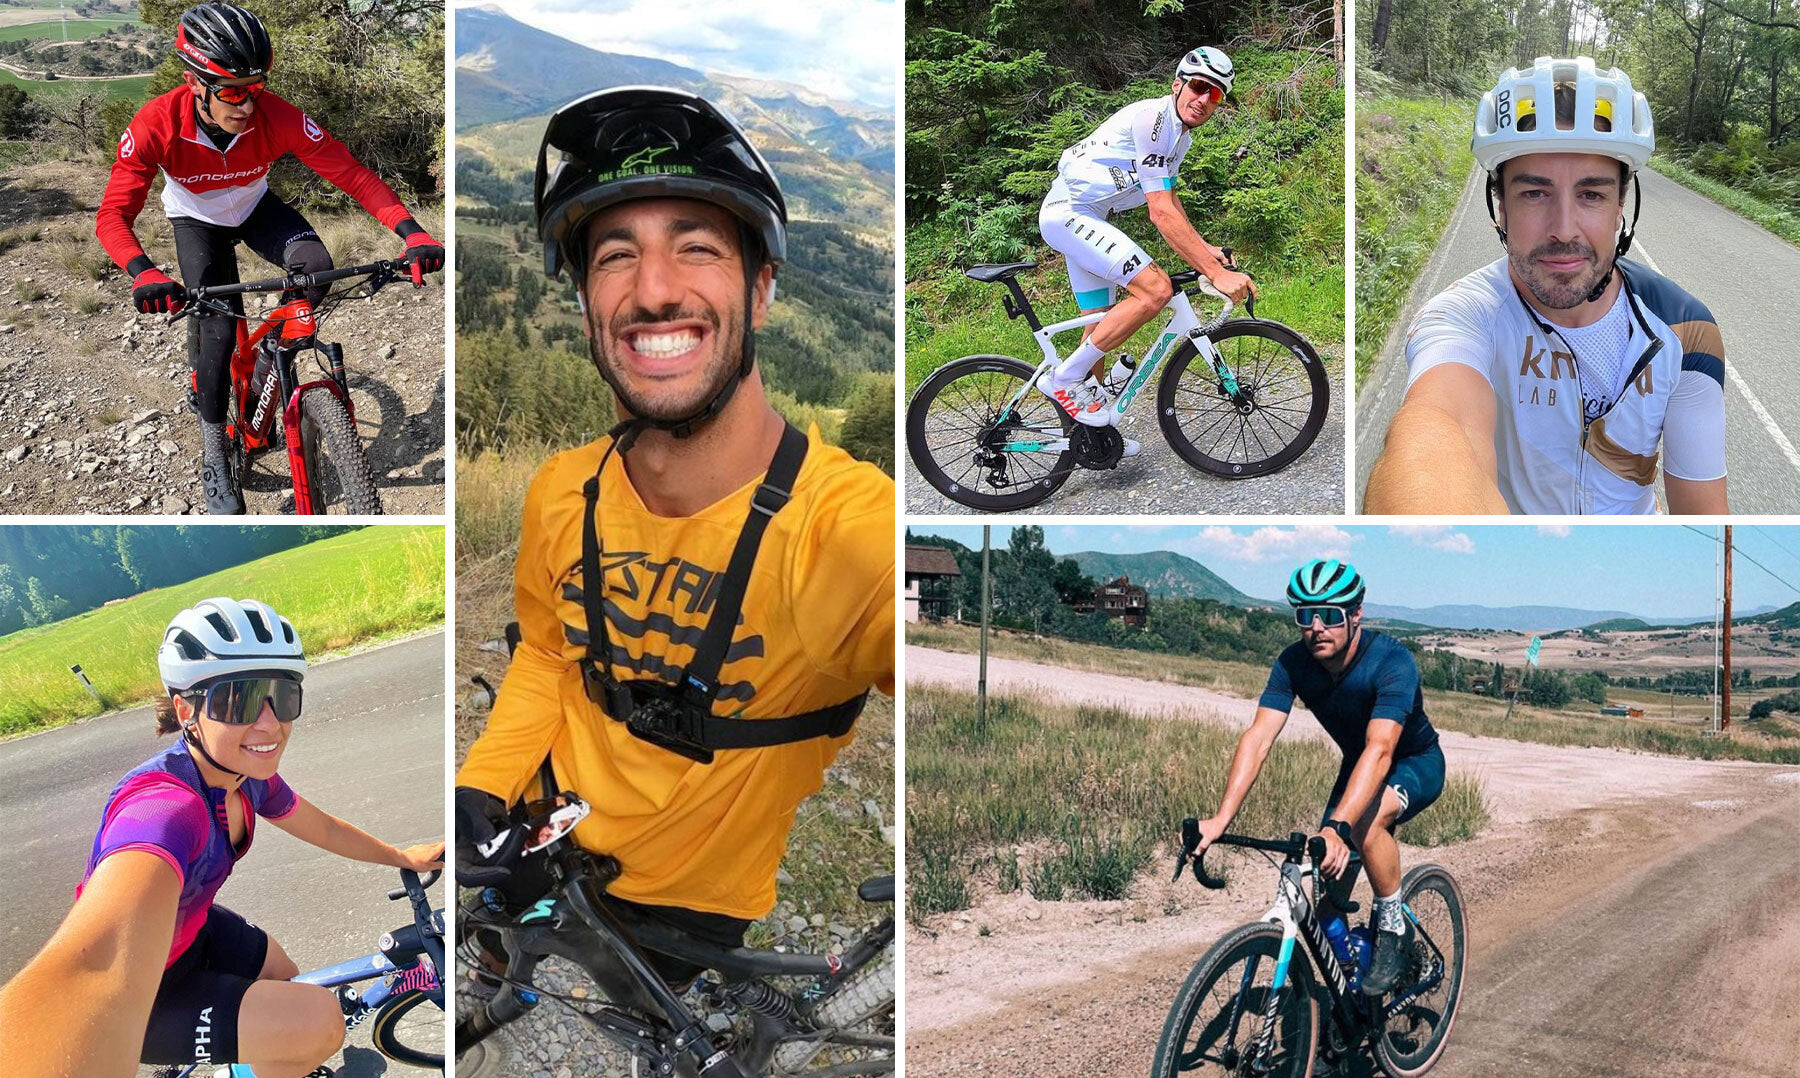 F1 drivers and MotoGP racers who ride bikes